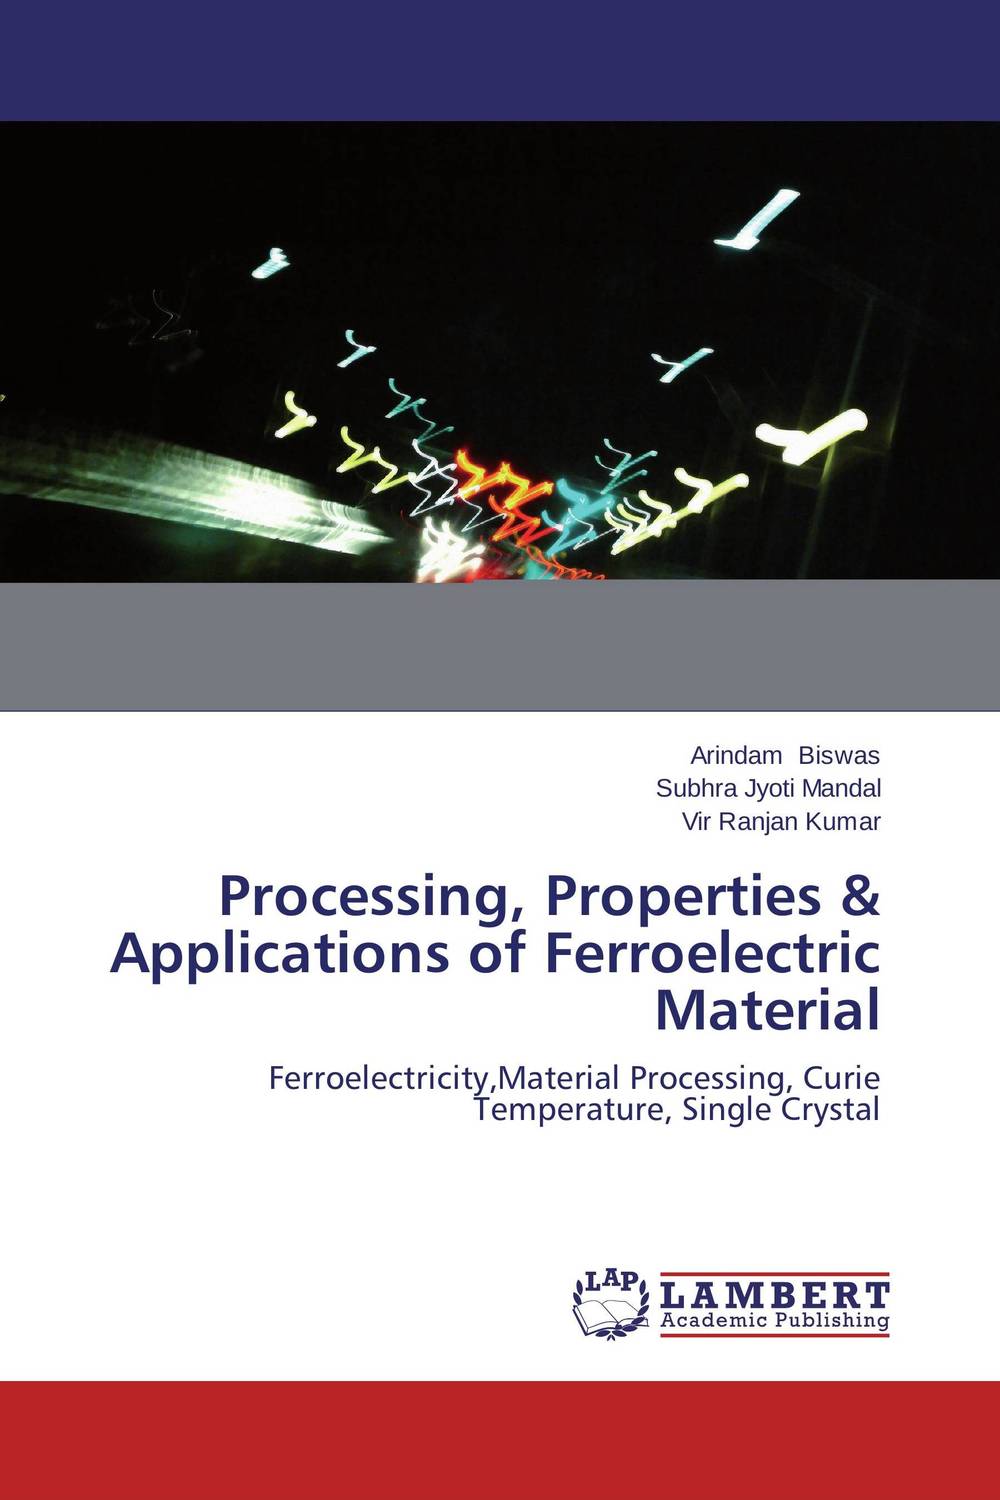 Processing, Properties & Applications of Ferroelectric Material